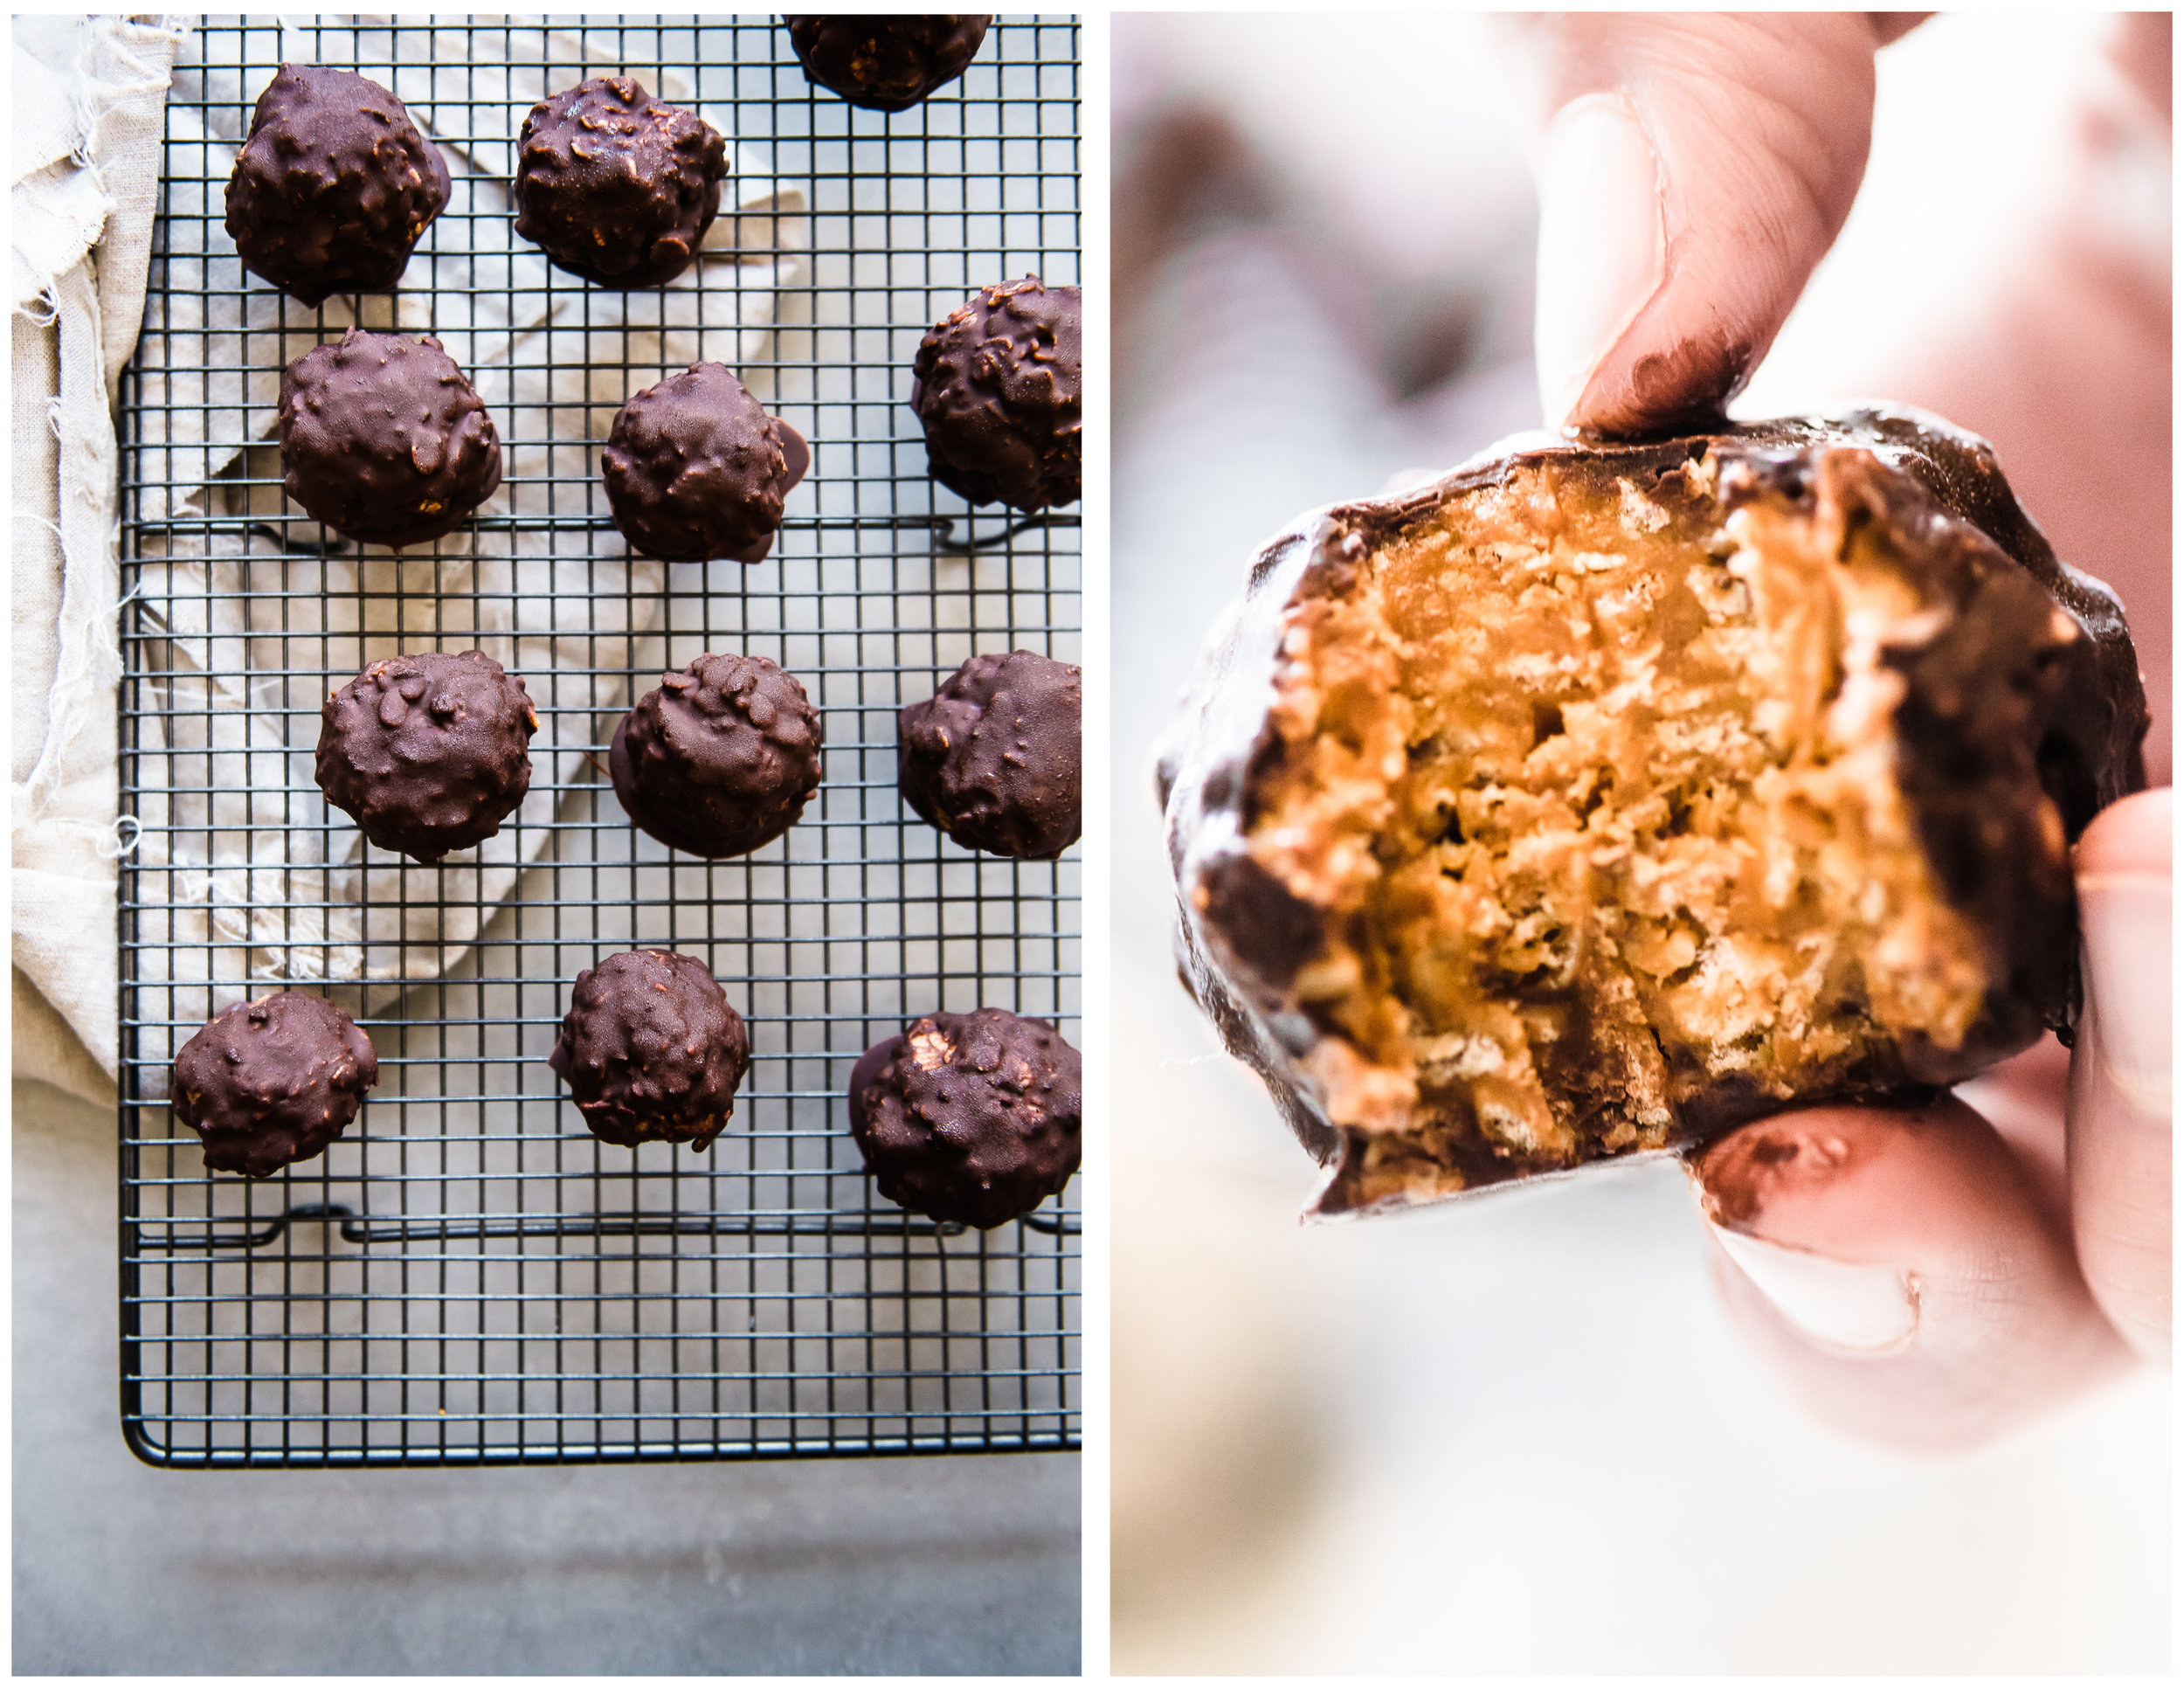 Crispy Chocolate Covered Peanut Butter Balls | Gather a Table